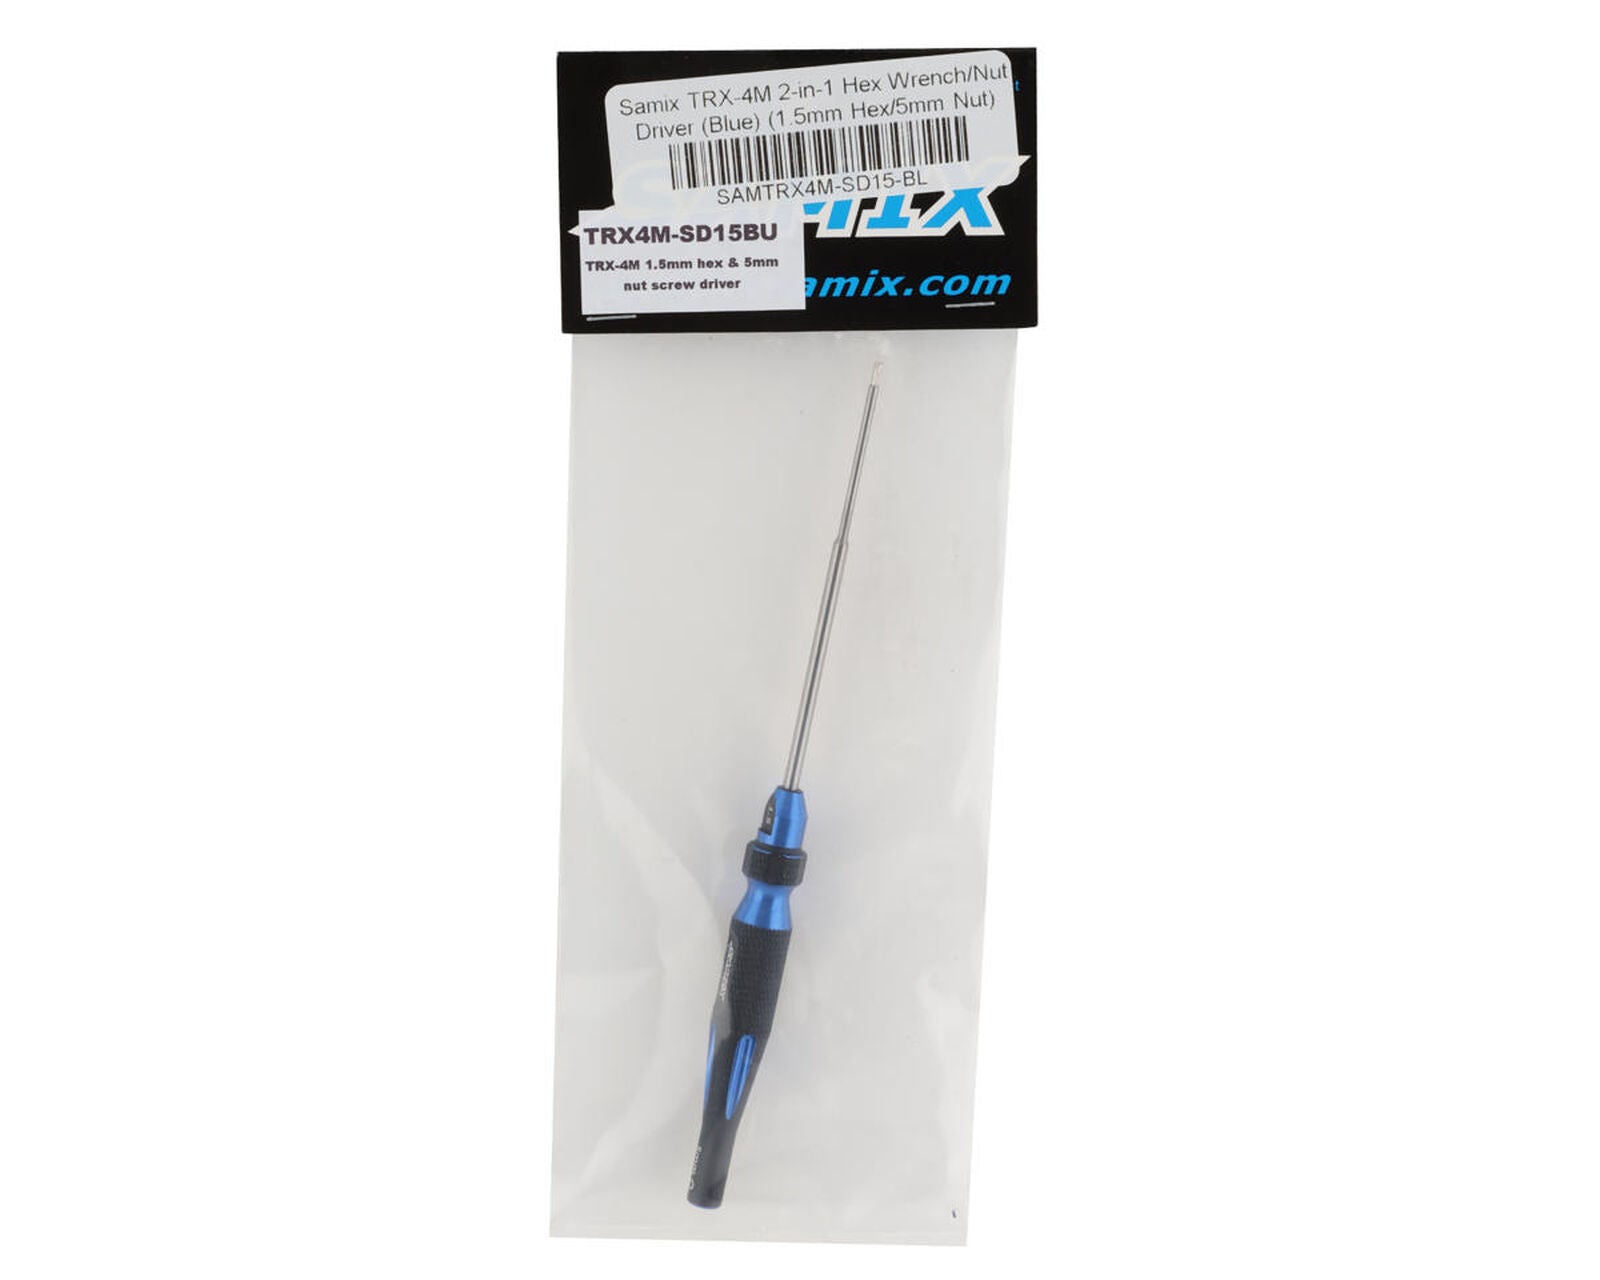 TRX-4M 2-in-1 Hex Wrench/Nut Driver (Blue) (1.5mm Hex/5mm Nut)